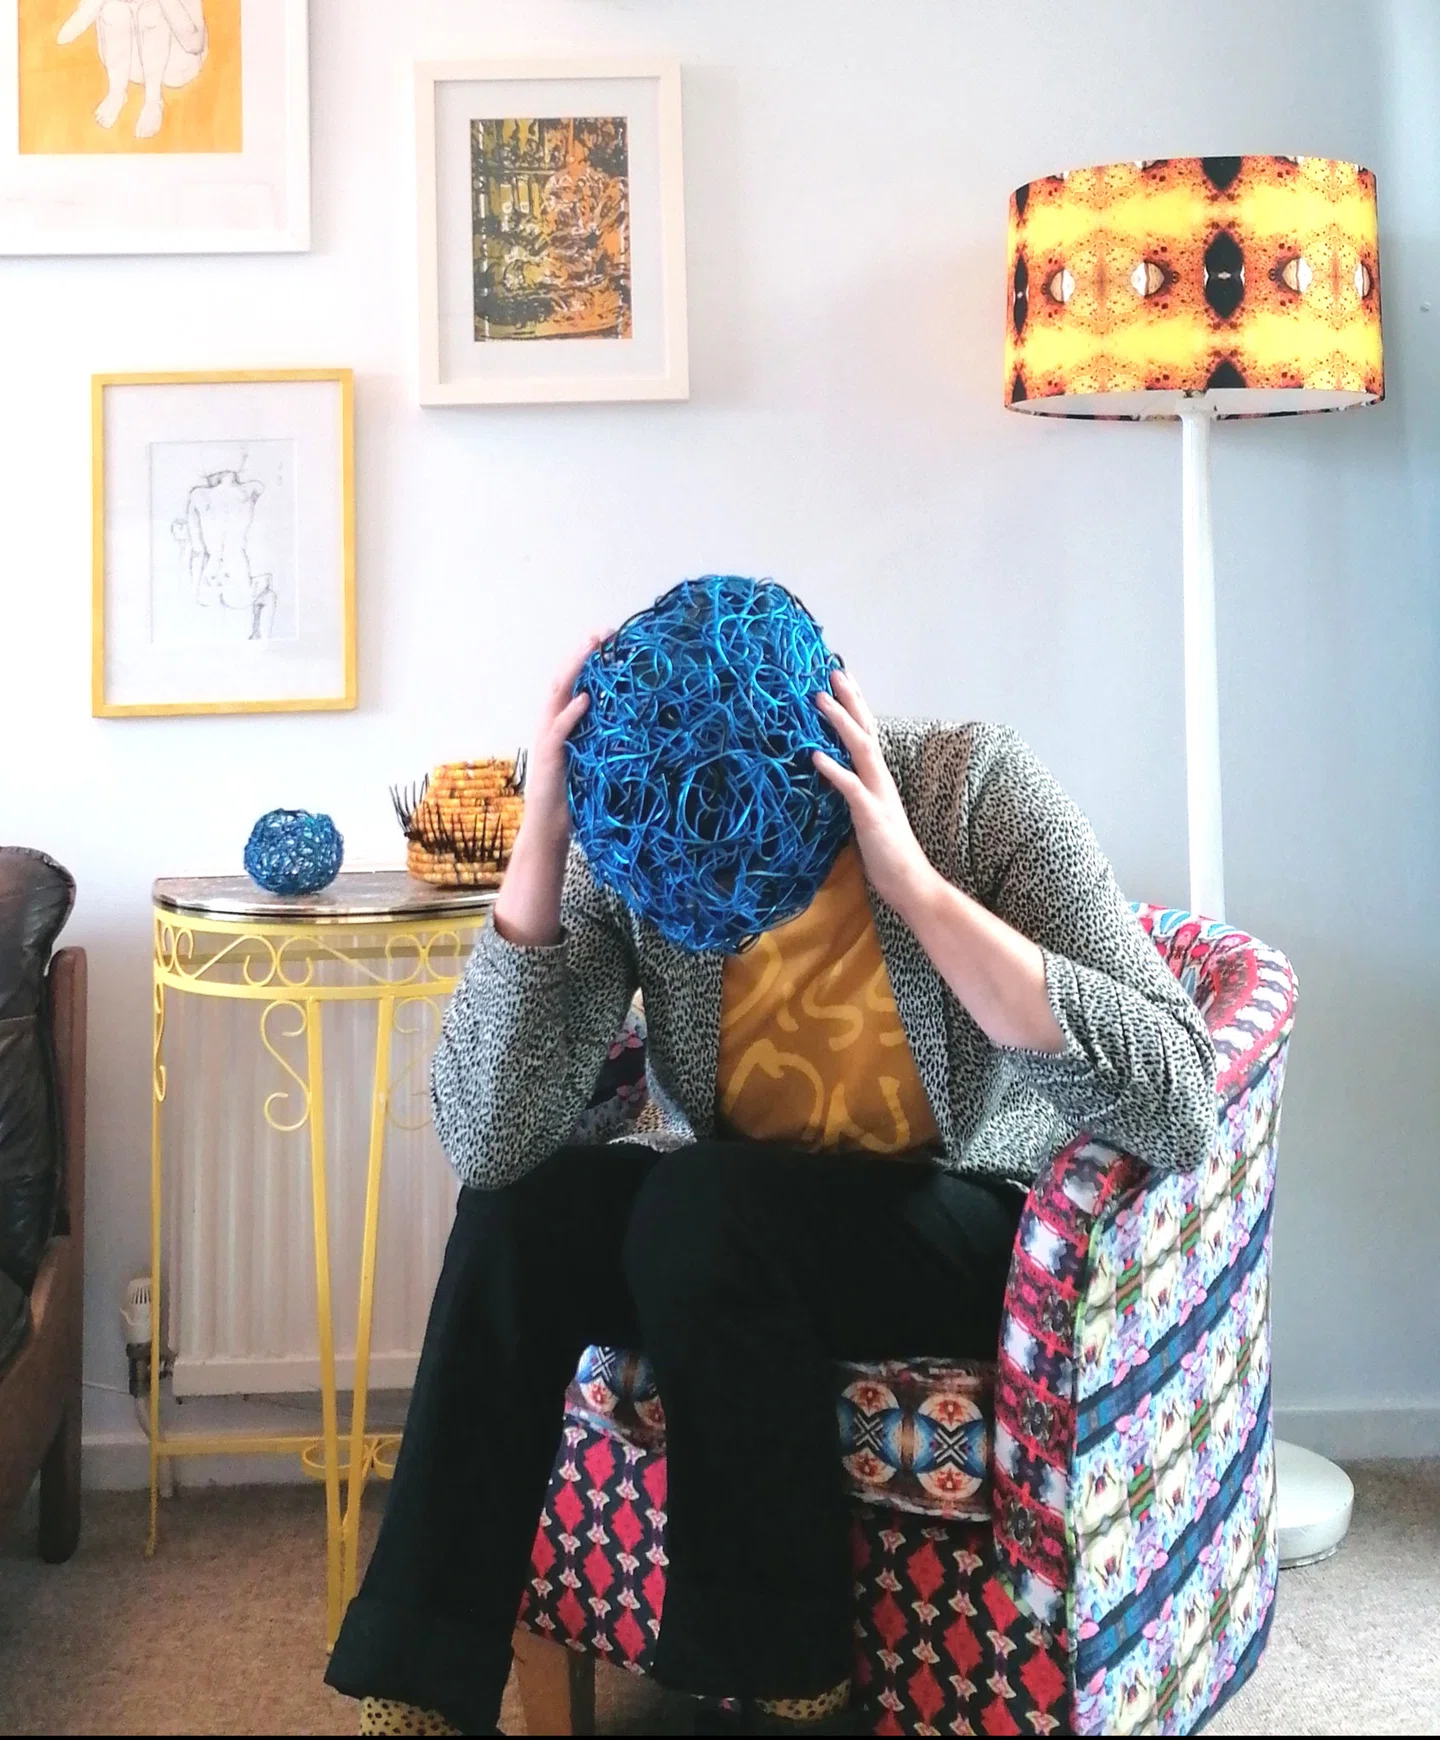 Artist wears a blue wire basket over her head and rests head in hands.